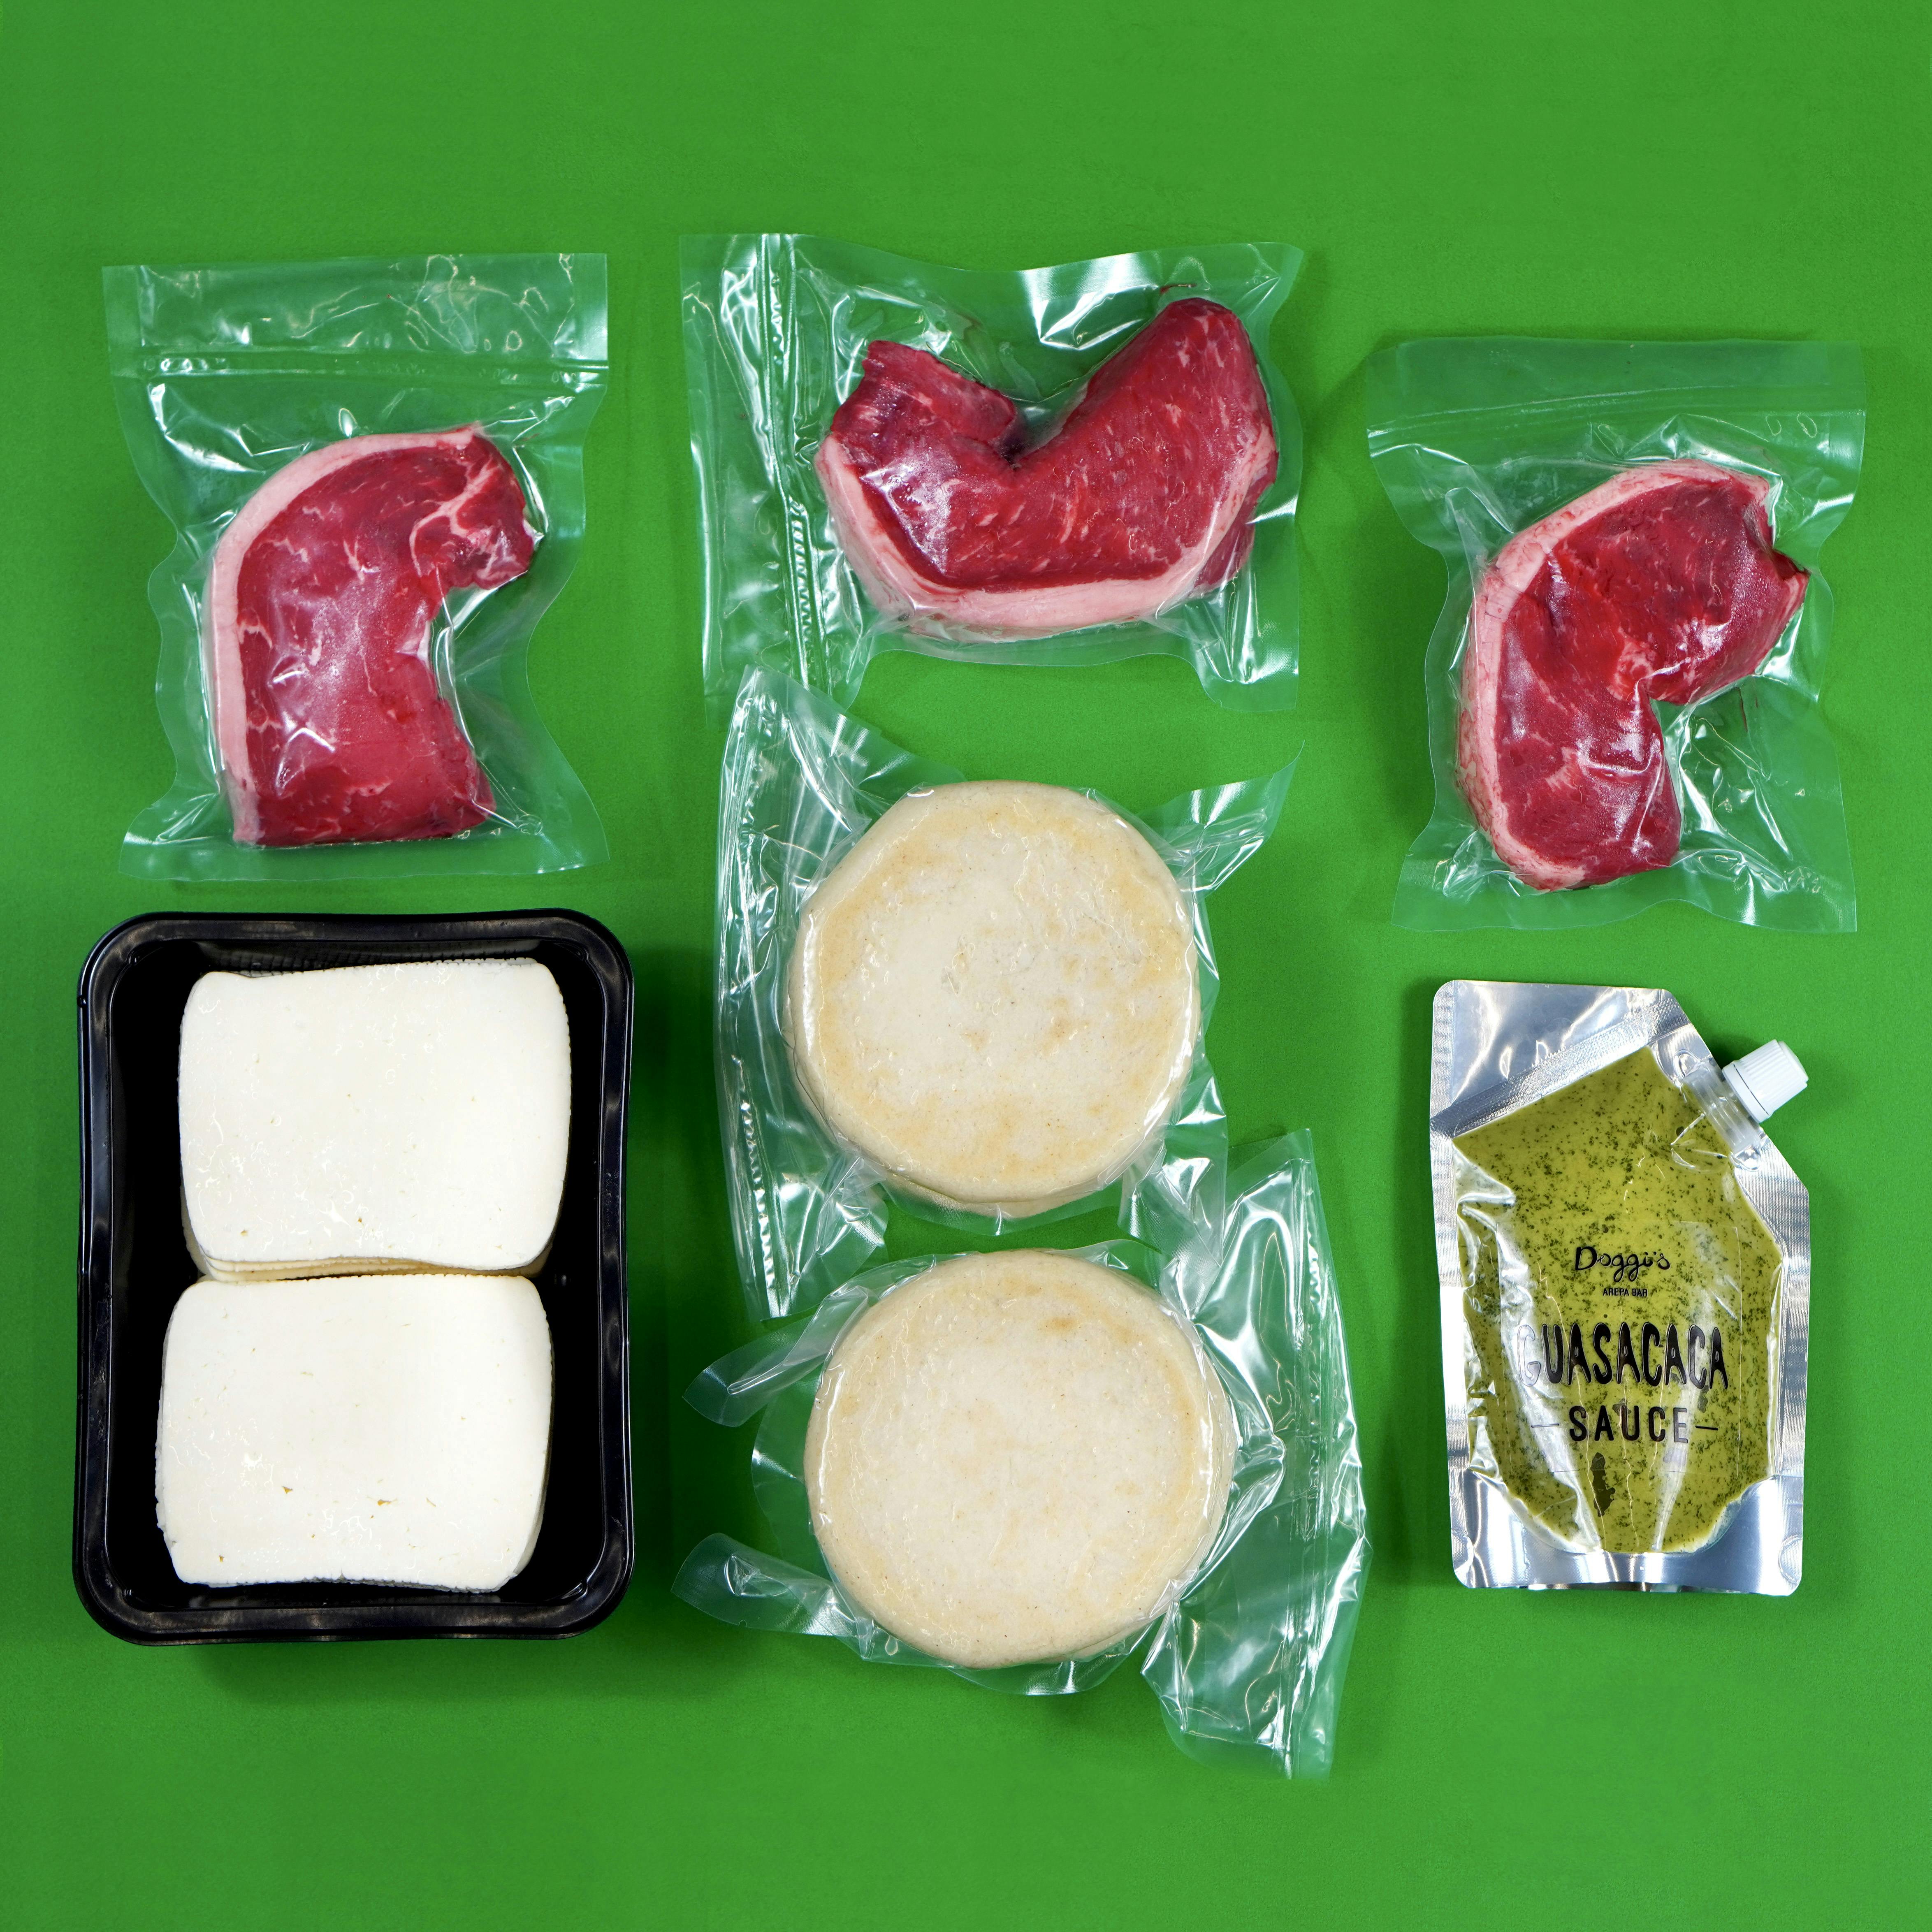 New Austin Food Delivery Service Sells Colorful Arepa Meal Kits